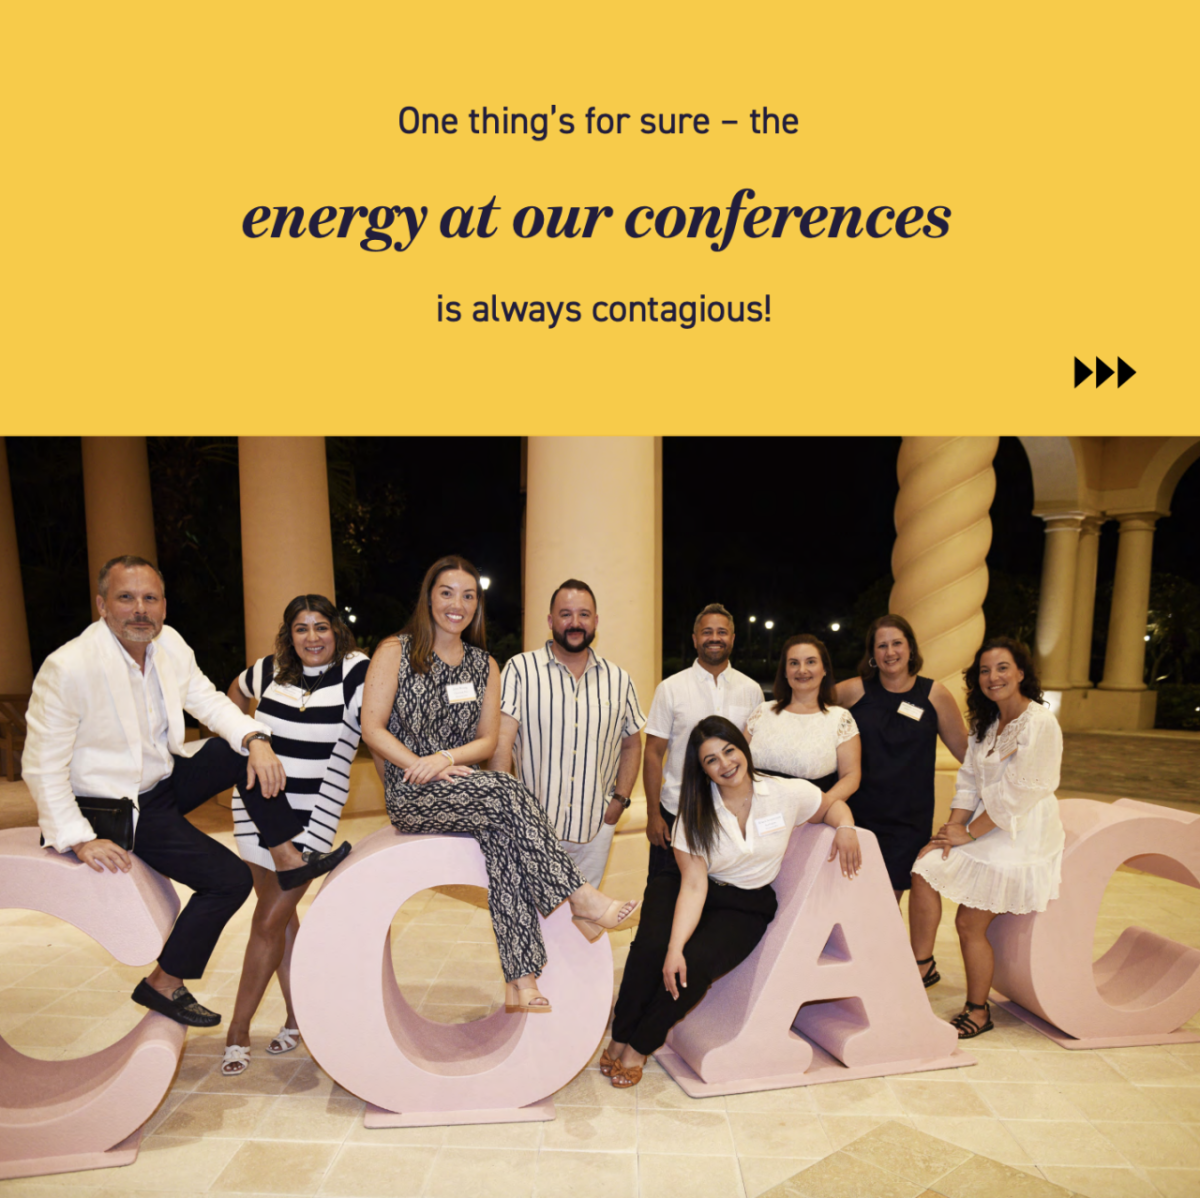 "One thing's for sure - the energy at our conferences is always contagious!"